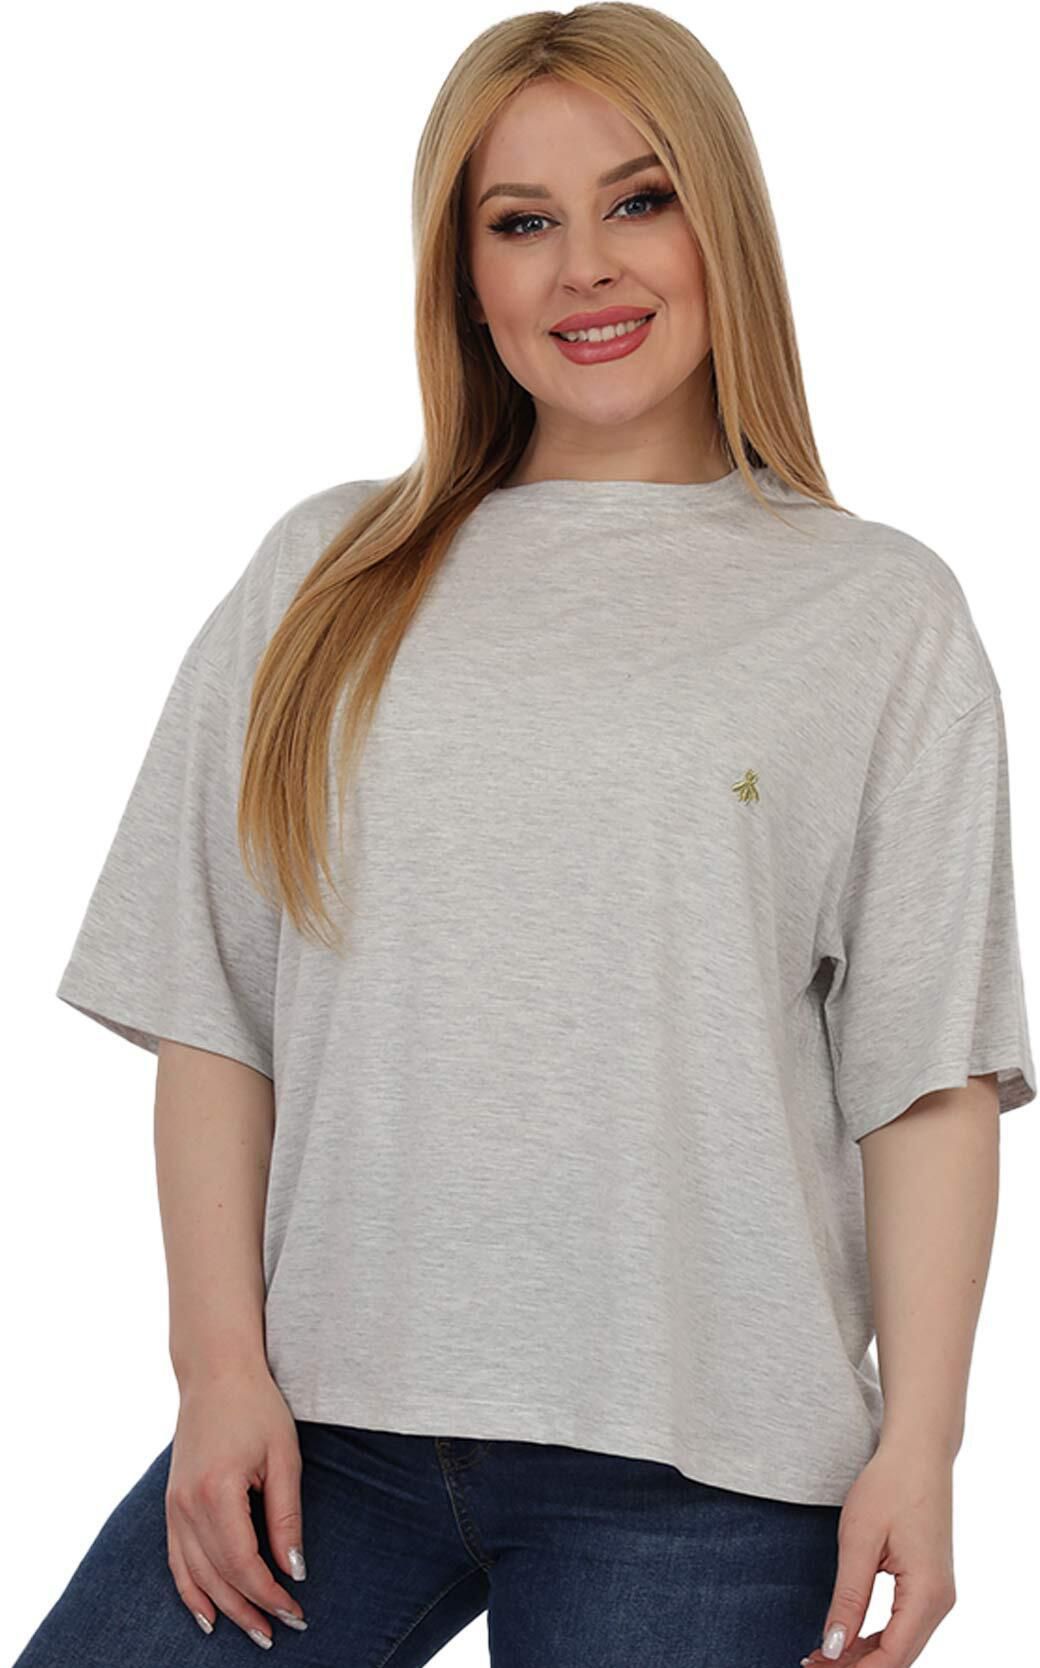 La Collection T-Shirt for Women - Large - Off White